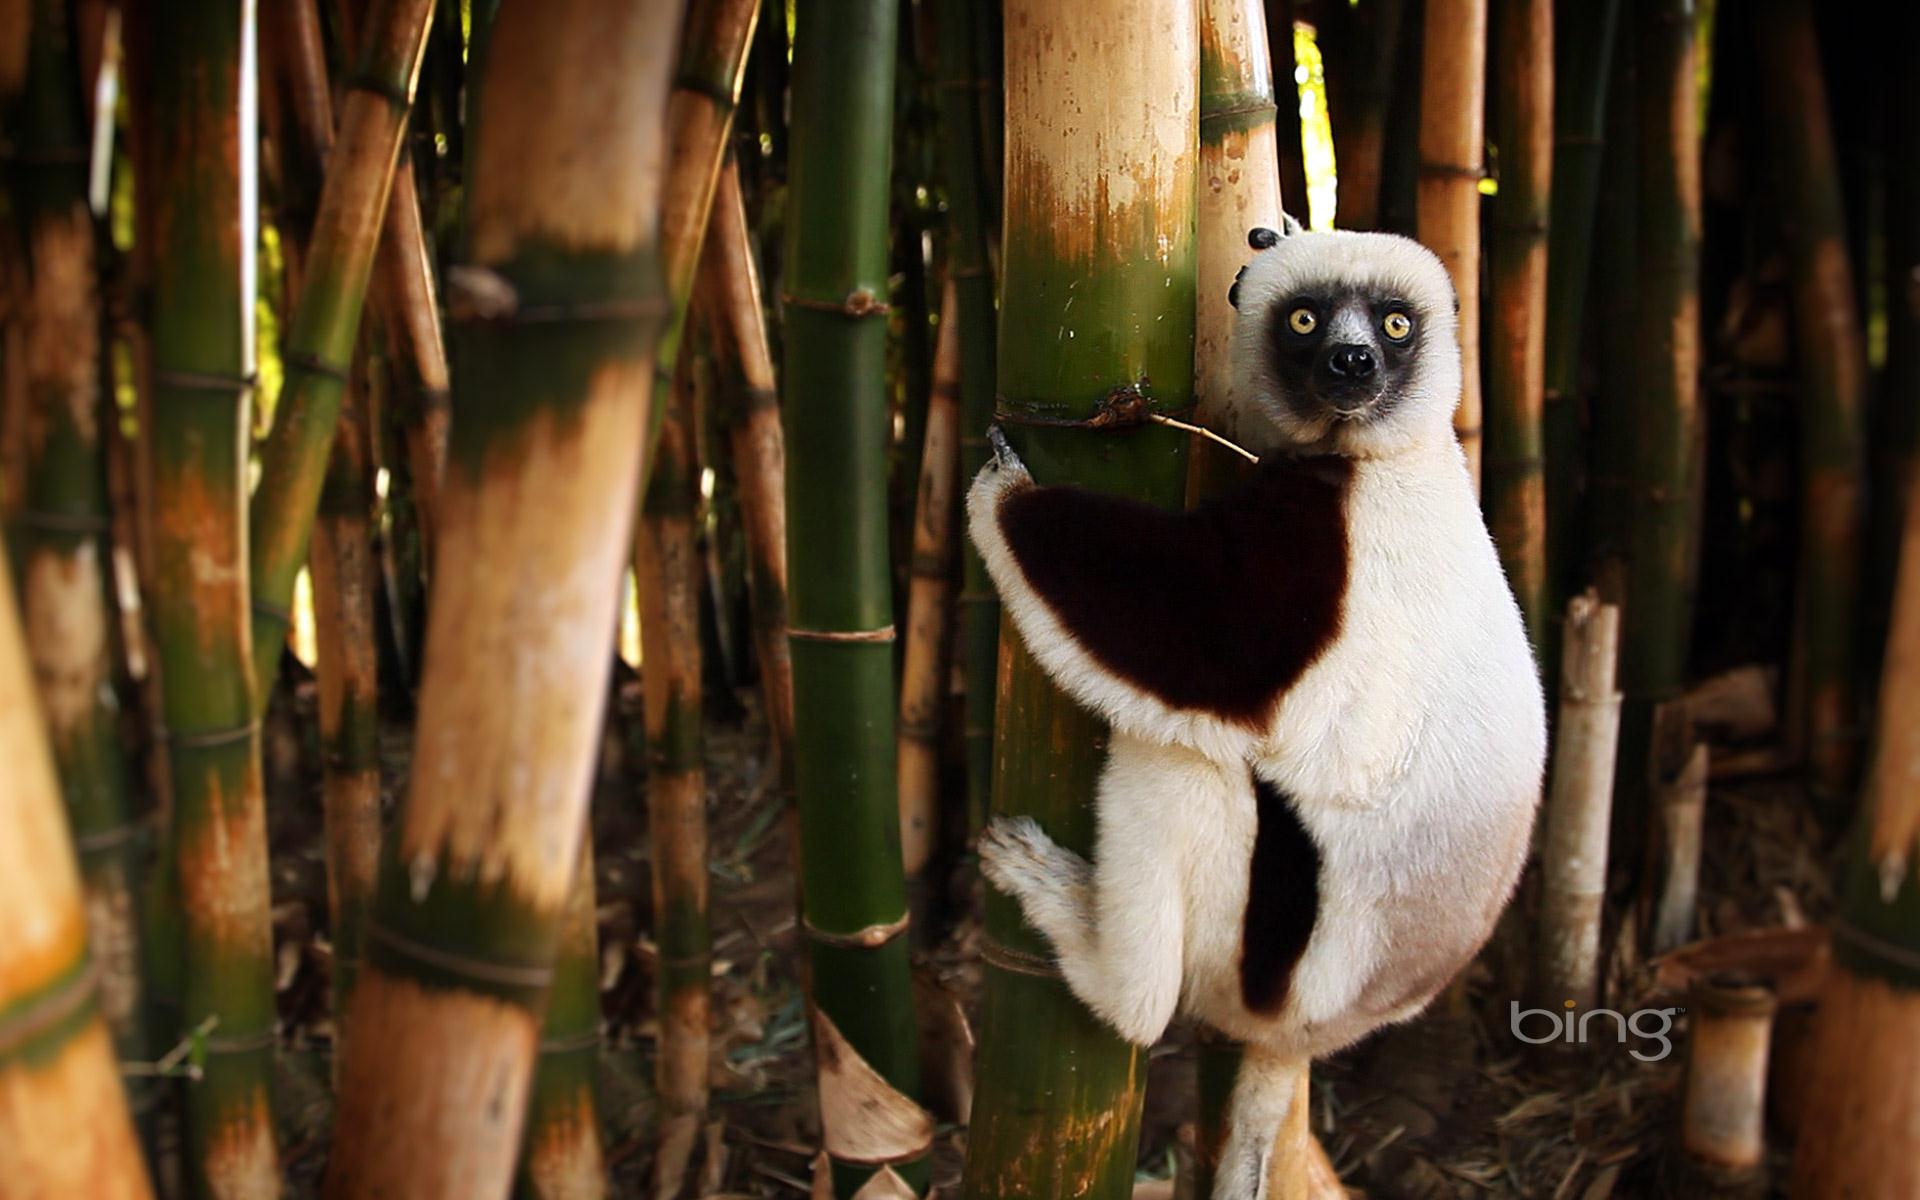 On A Bamboo Tree Madagascar Bing Wallpaper Of The Day Image Great